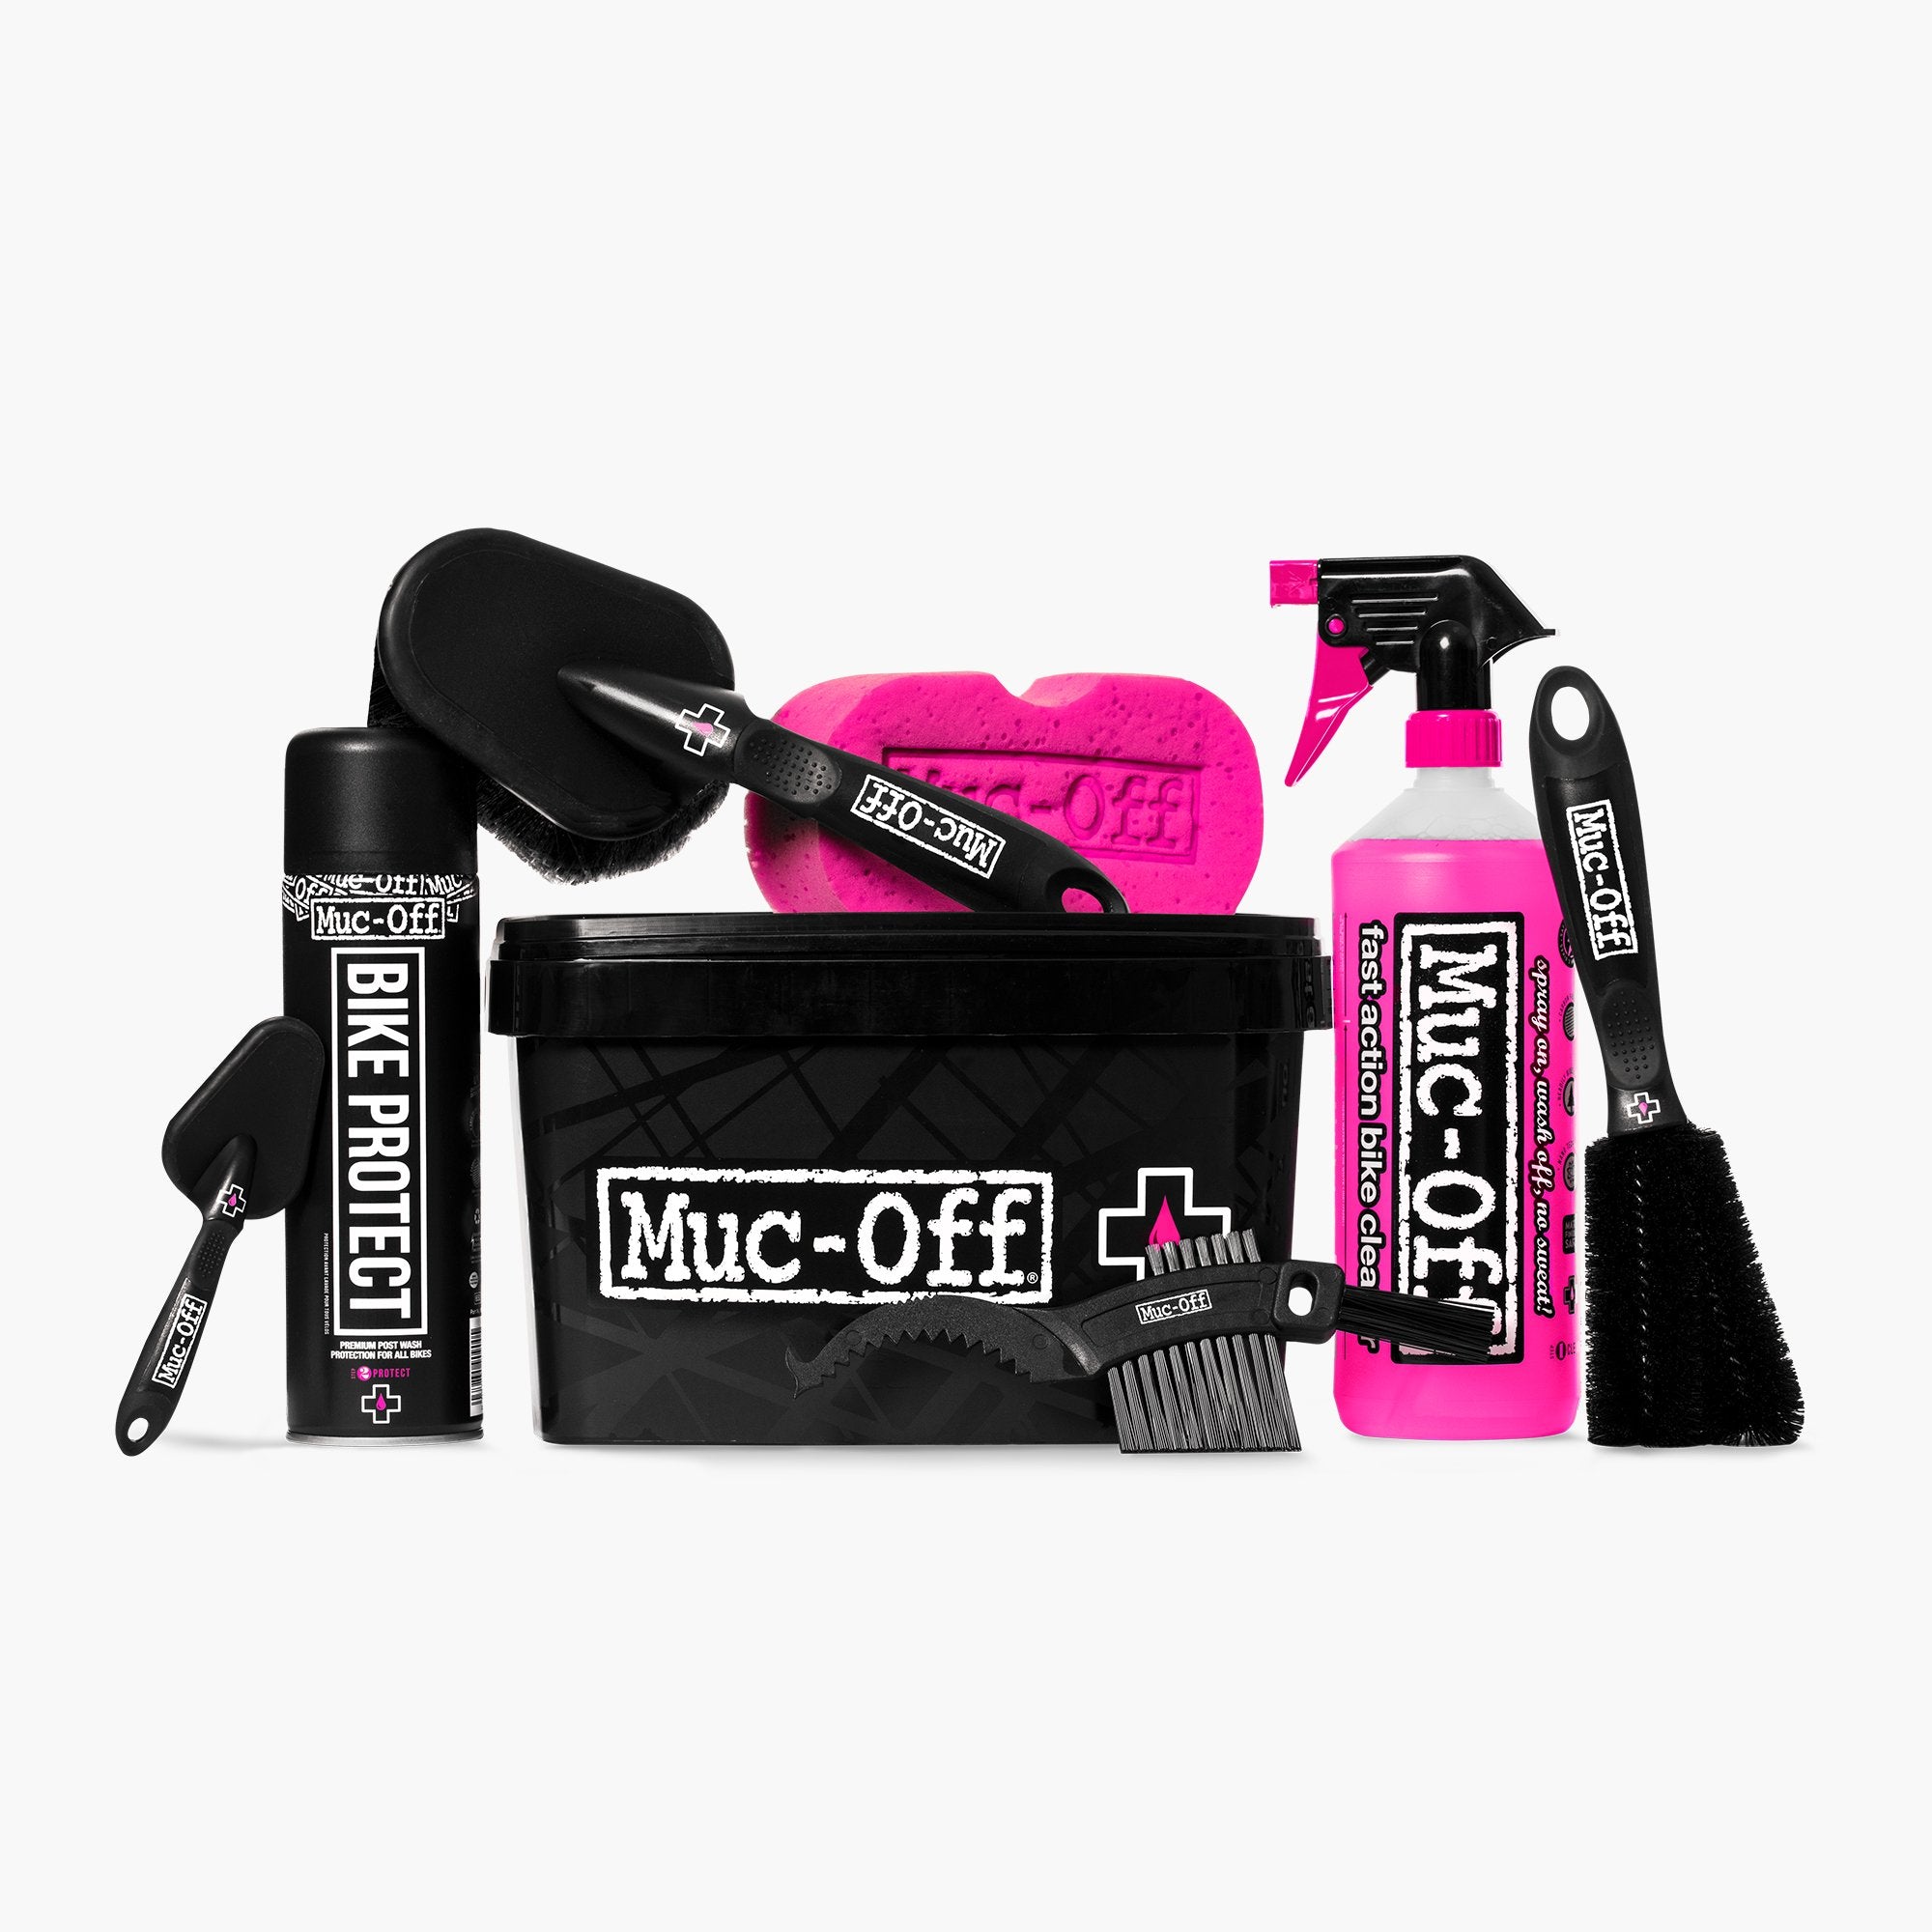 Muc-Off Muc-Off Motorcycle Care Kit